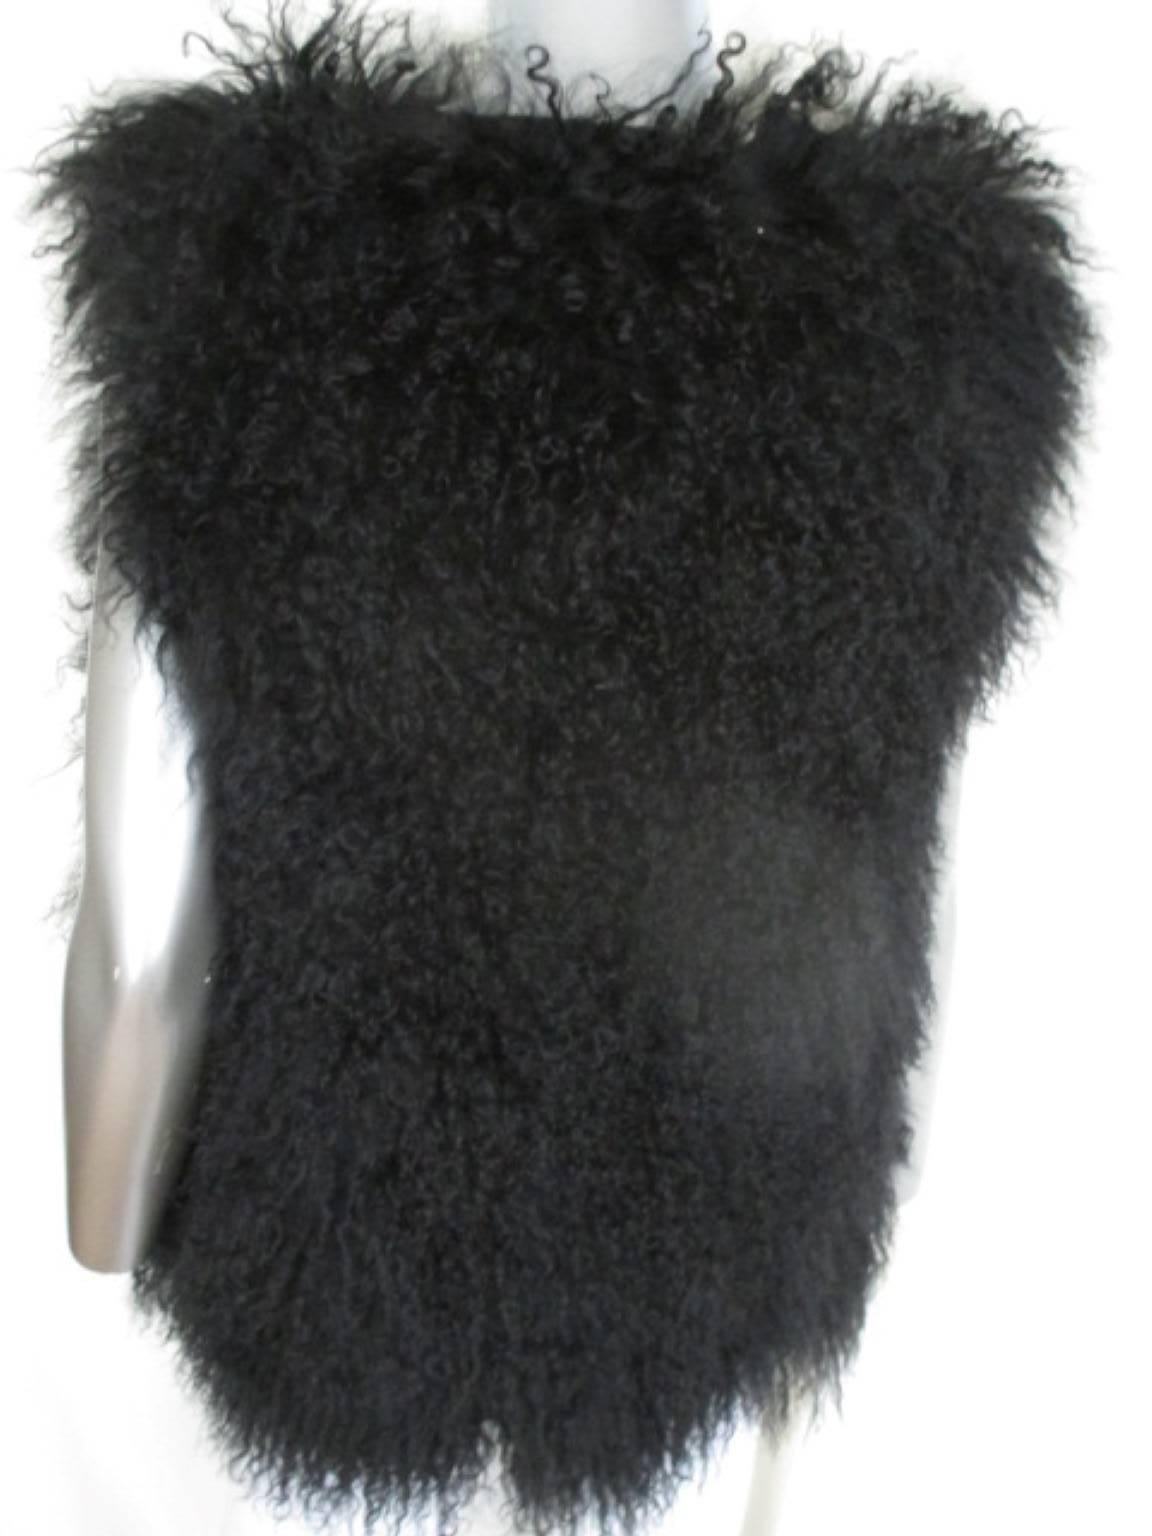 This Mongolian lamb vest is collarless with 2 pockets and 1 closing hook.
Size fits like a EU 38/40 - US 8/10 
medium